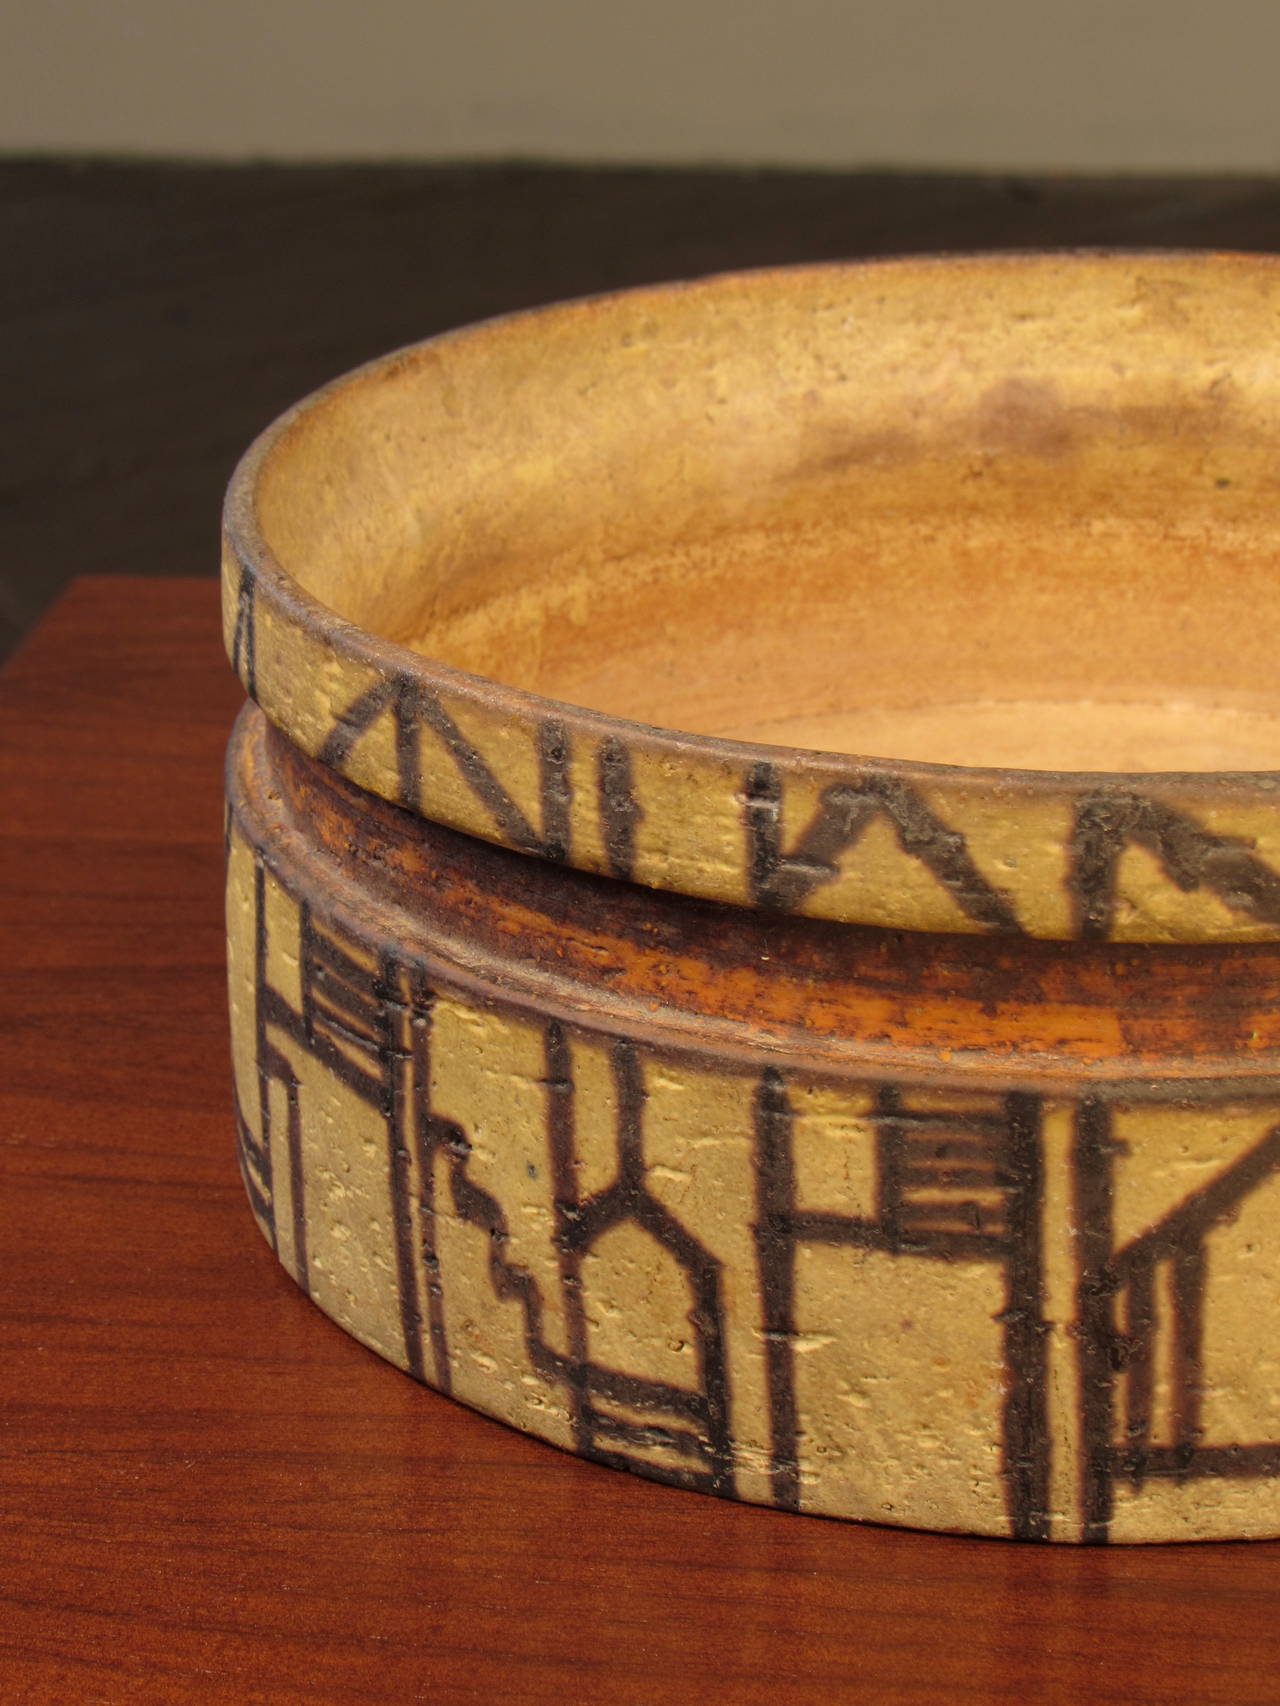 Fired Signed Pottery Bowl with Architectural Decoration by Marcello Fantoni, Italy